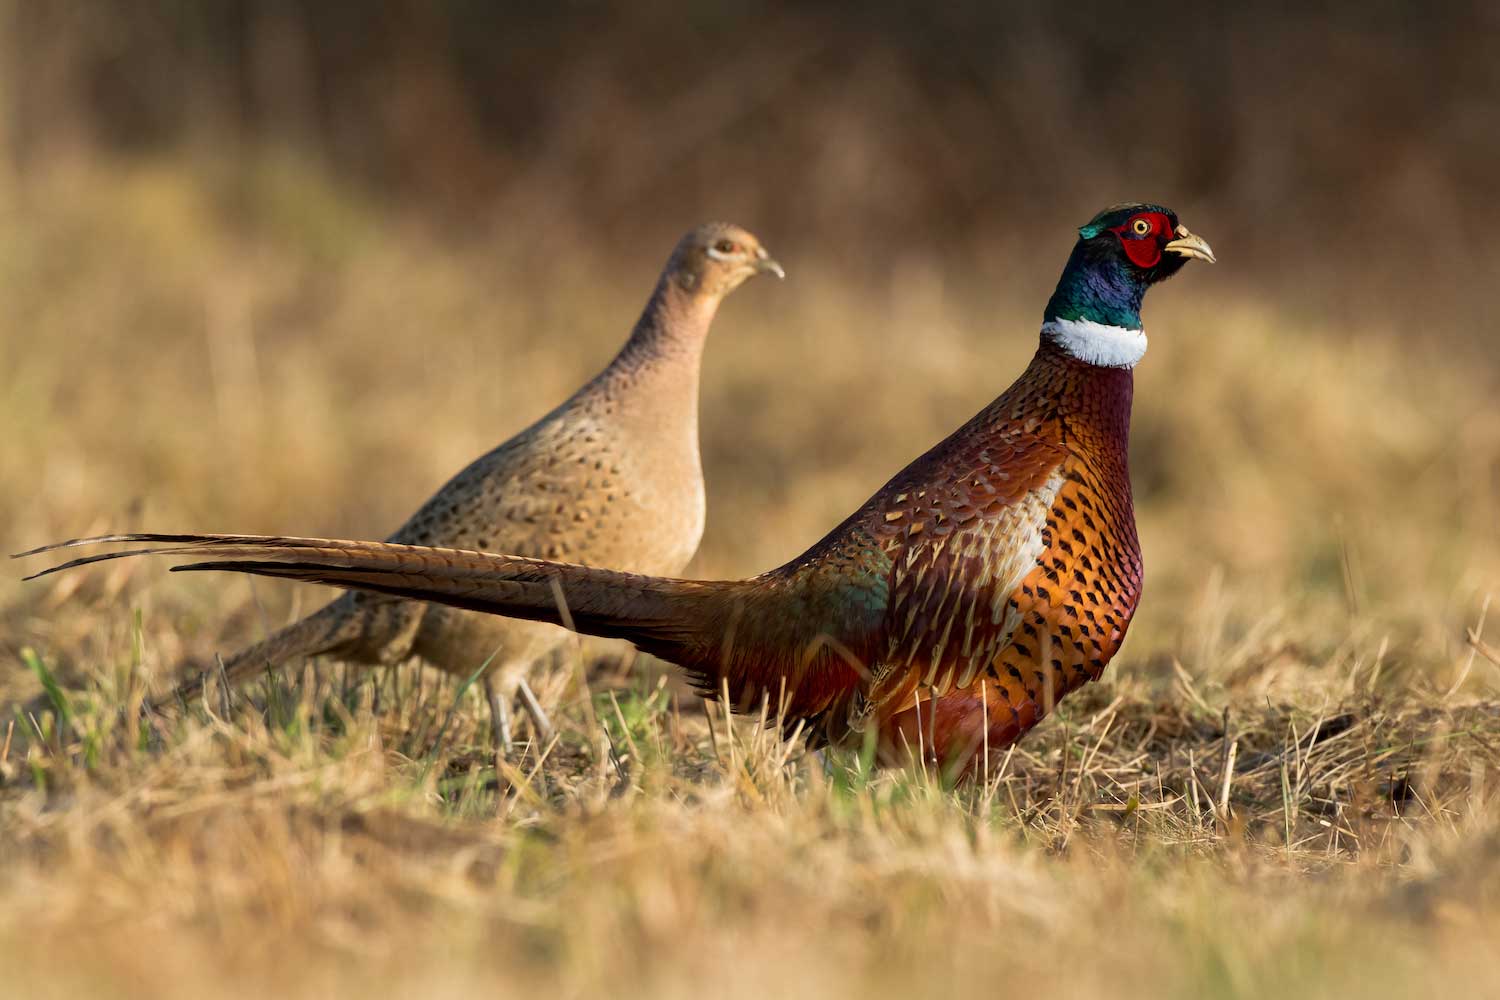 Ring-necked pheasants not native to U.S. but have thrived as a